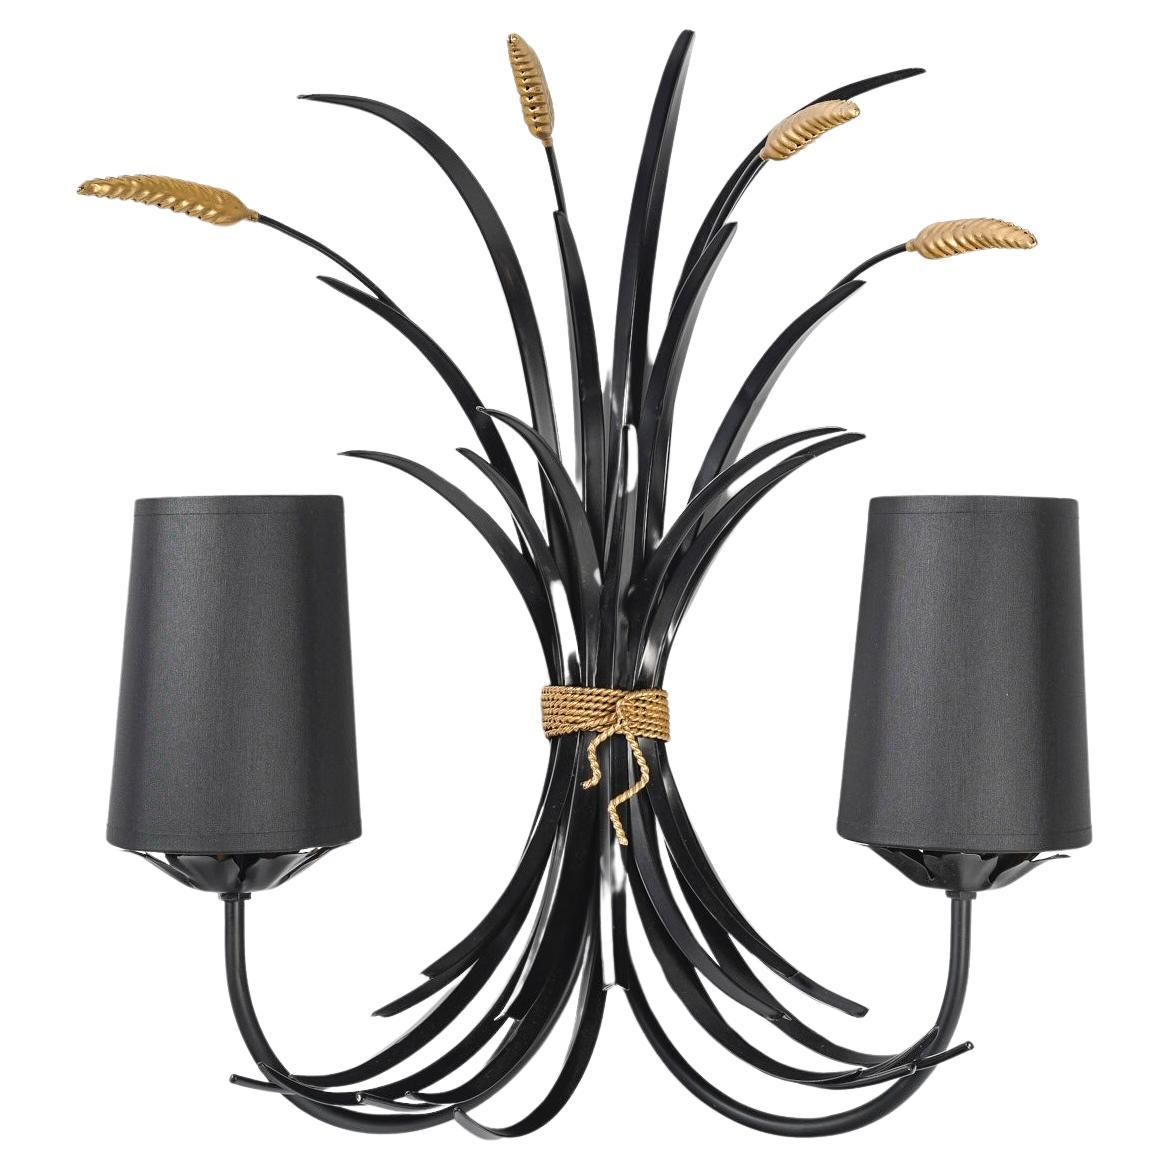 Wheat bouquet in black and gold metal, composed of black foliage and gold ears of wheat assembled by a pretty knot imitating twisted gold rope.
On the lower part, two arms of light positioned on either side of the sconce are dressed in black cotton